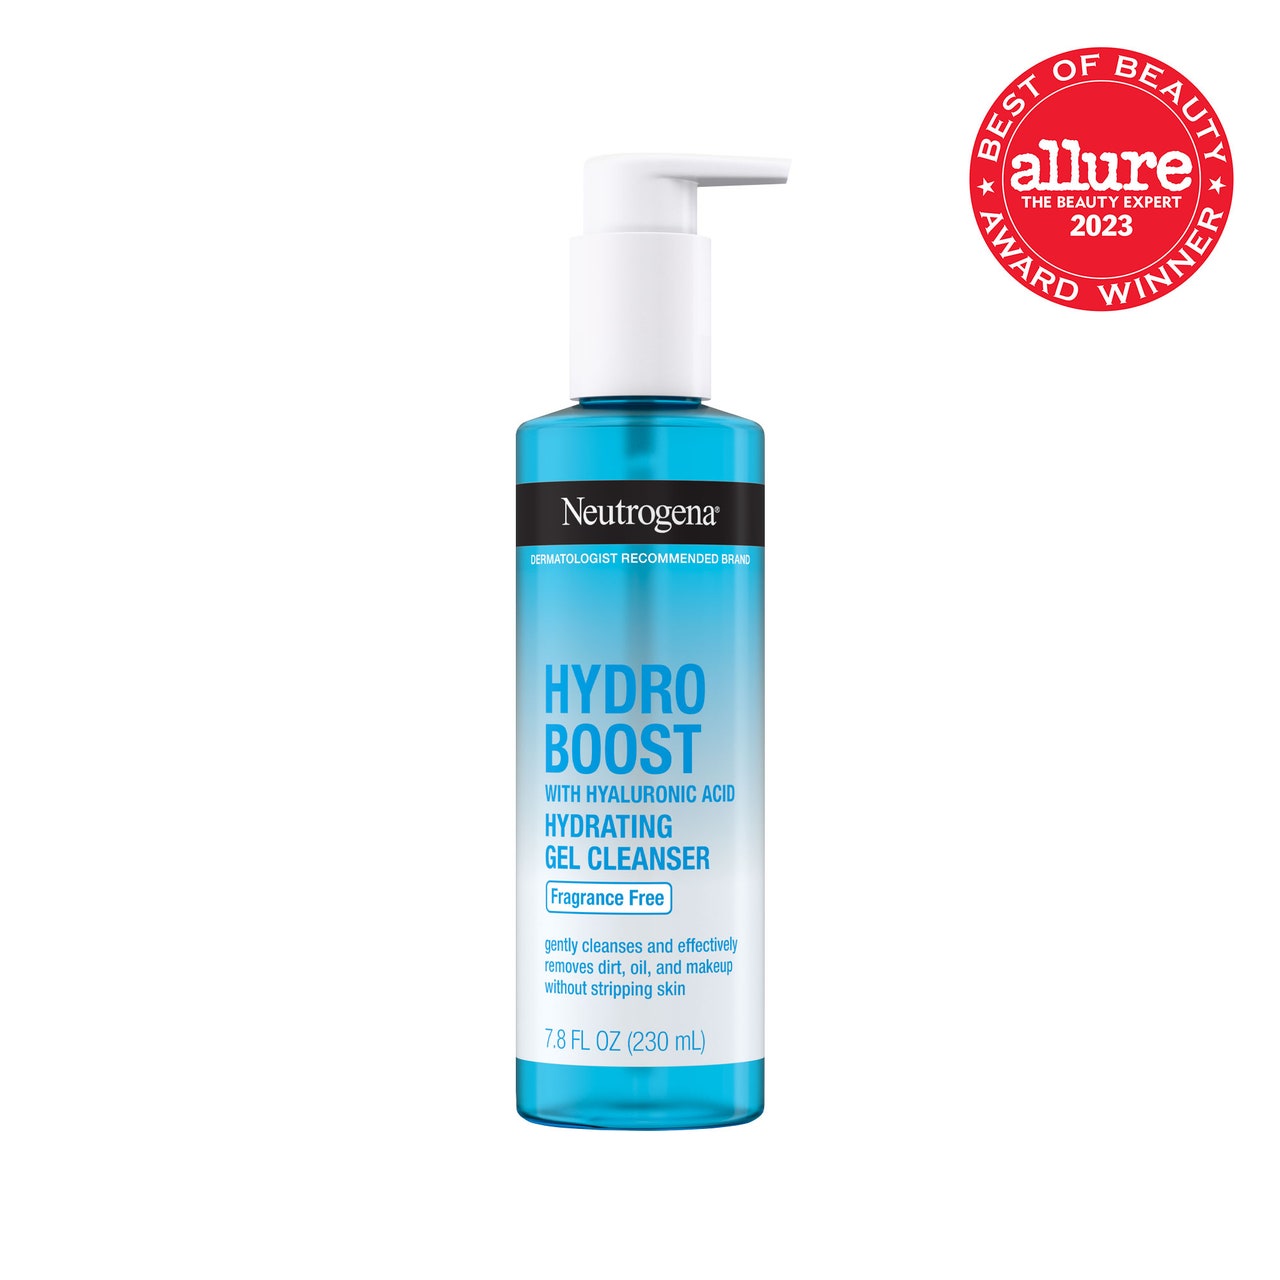 Neutrogena Hydro Boost Hydrating Gel Cleanser, Fragrance Free turquoise bottle of facial cleanser with white pump on white background with red Allure BoB seal in the top right corner